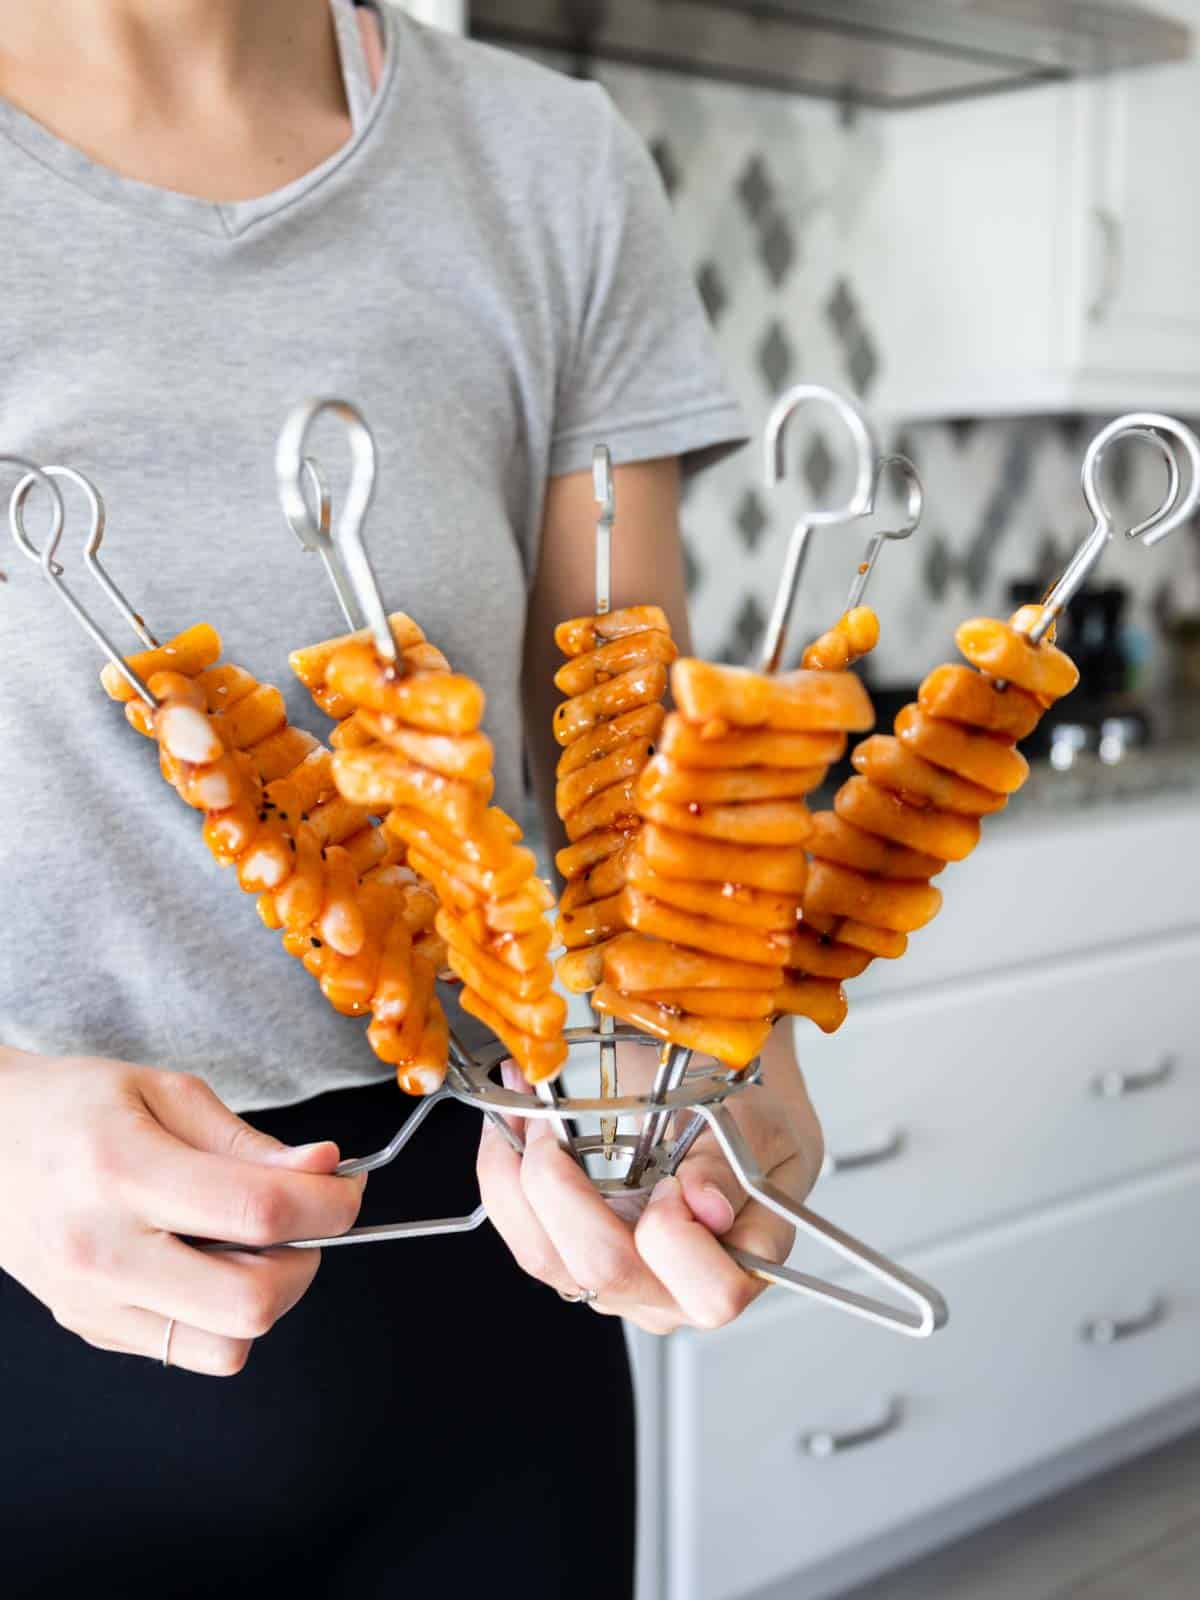 A person holding the glazed vegan Tteokbokki on skewers assembled in the O-yaki skewer system before grilling.